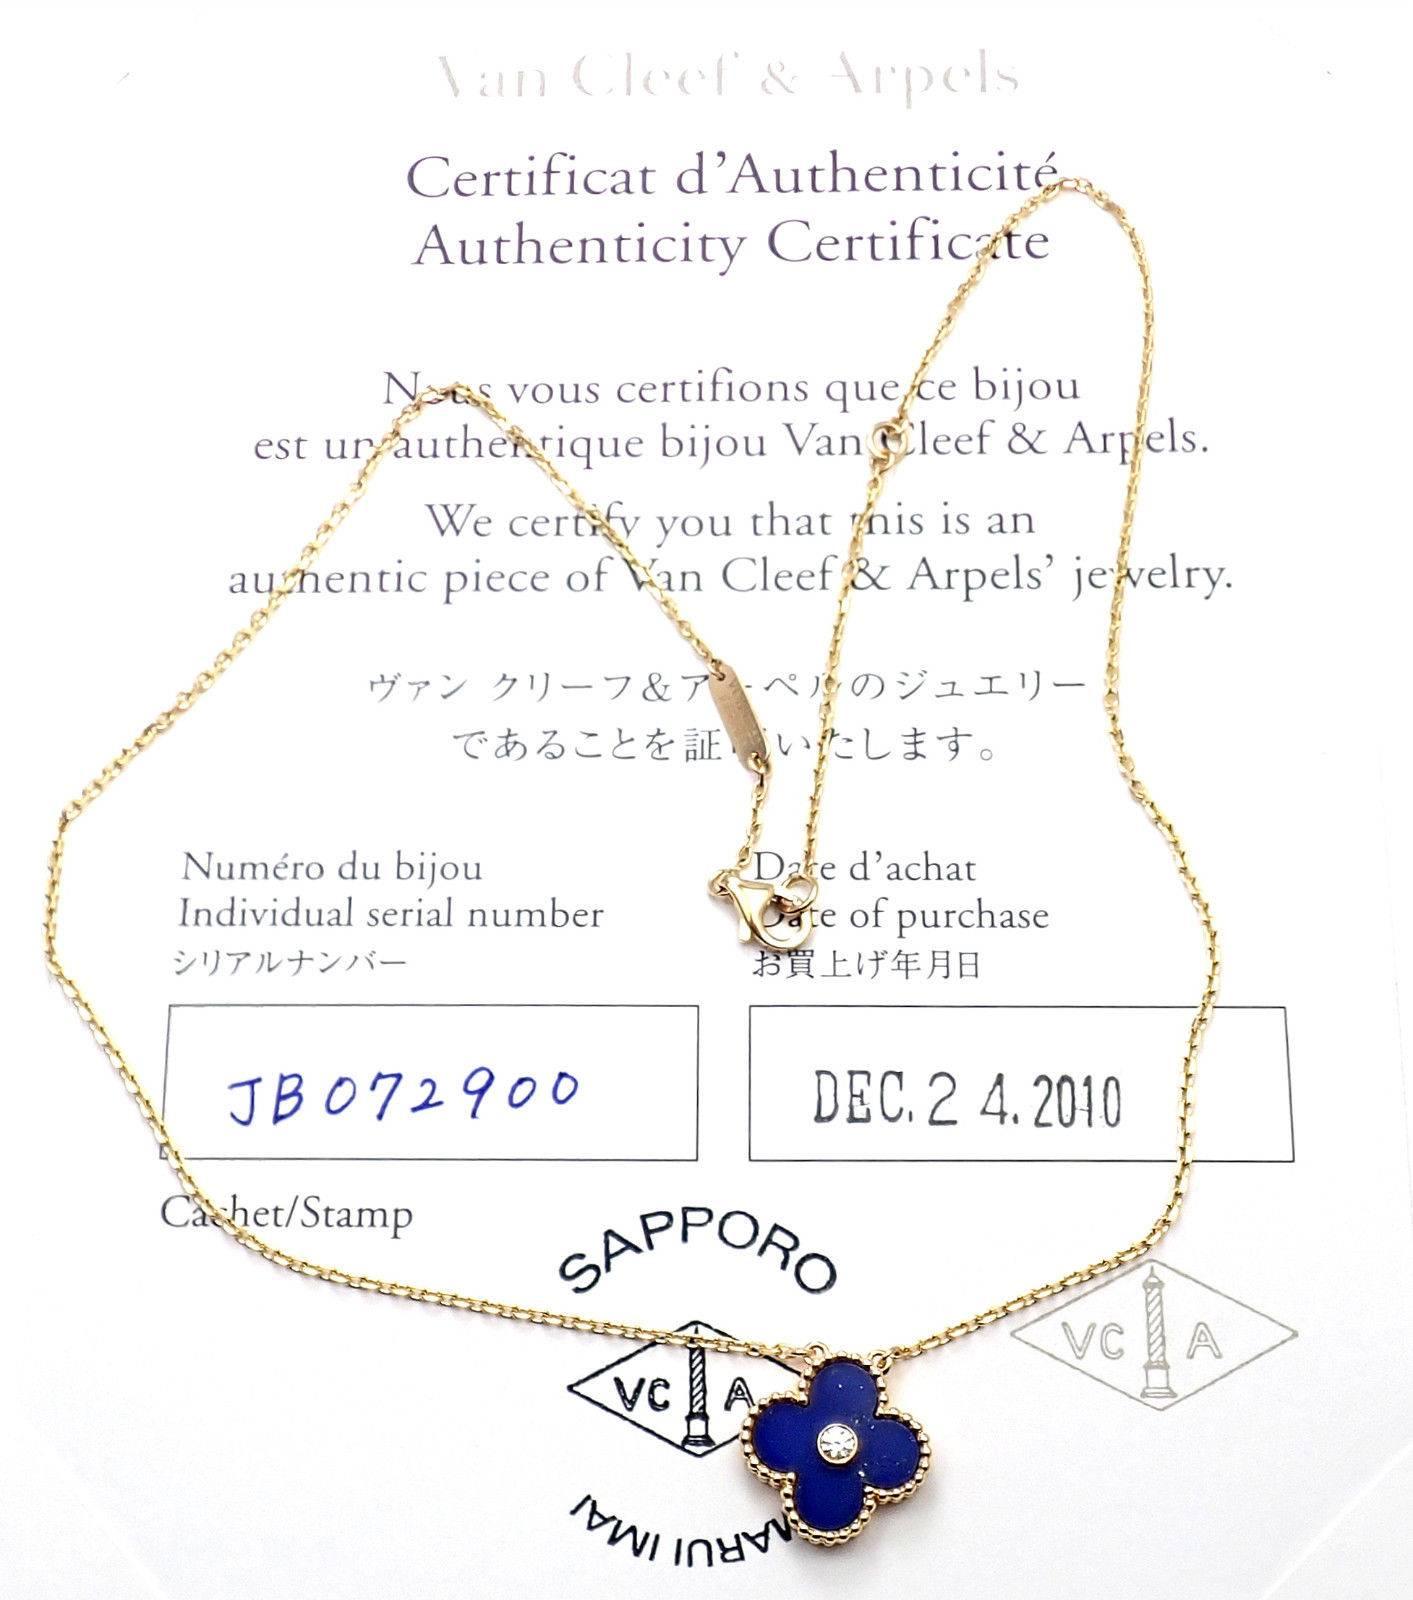 18k Yellow Gold Limited Edition Alhambra Diamond Lapis Necklace
With 1 lapis lazuli alhambra stone 15mm 
1 round brilliant cut diamond VVS1 clarity E color total weight .05ct
This necklace was created in limited by Van Cleef & Arpels to celebrate